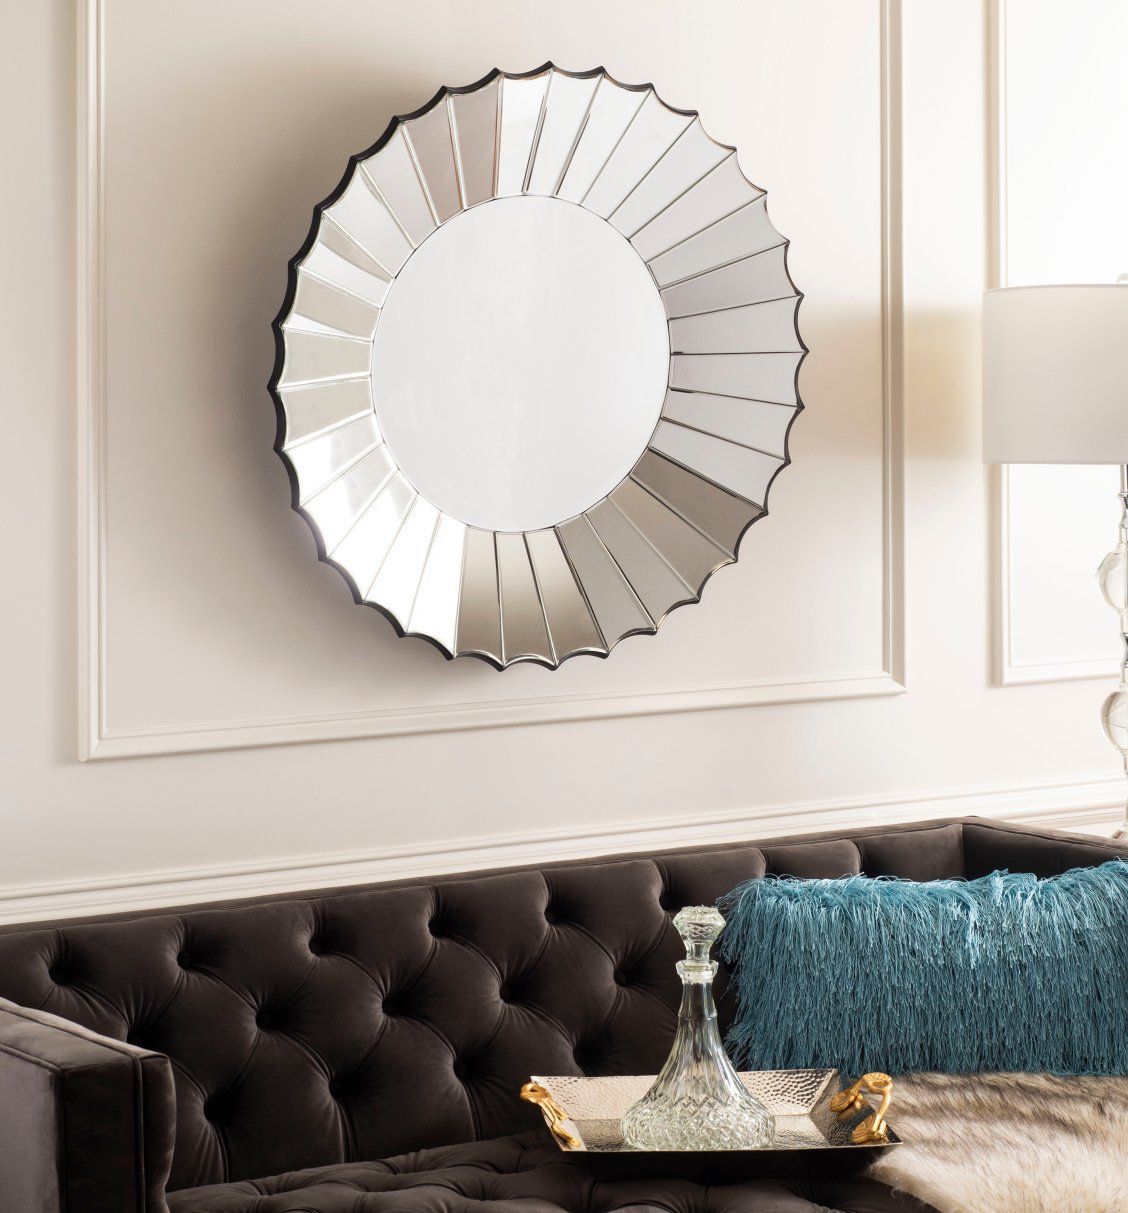 Embracedtraditional And Contemporary Designers, This Timeless Throughout Brylee Traditional Sunburst Mirrors (View 15 of 15)